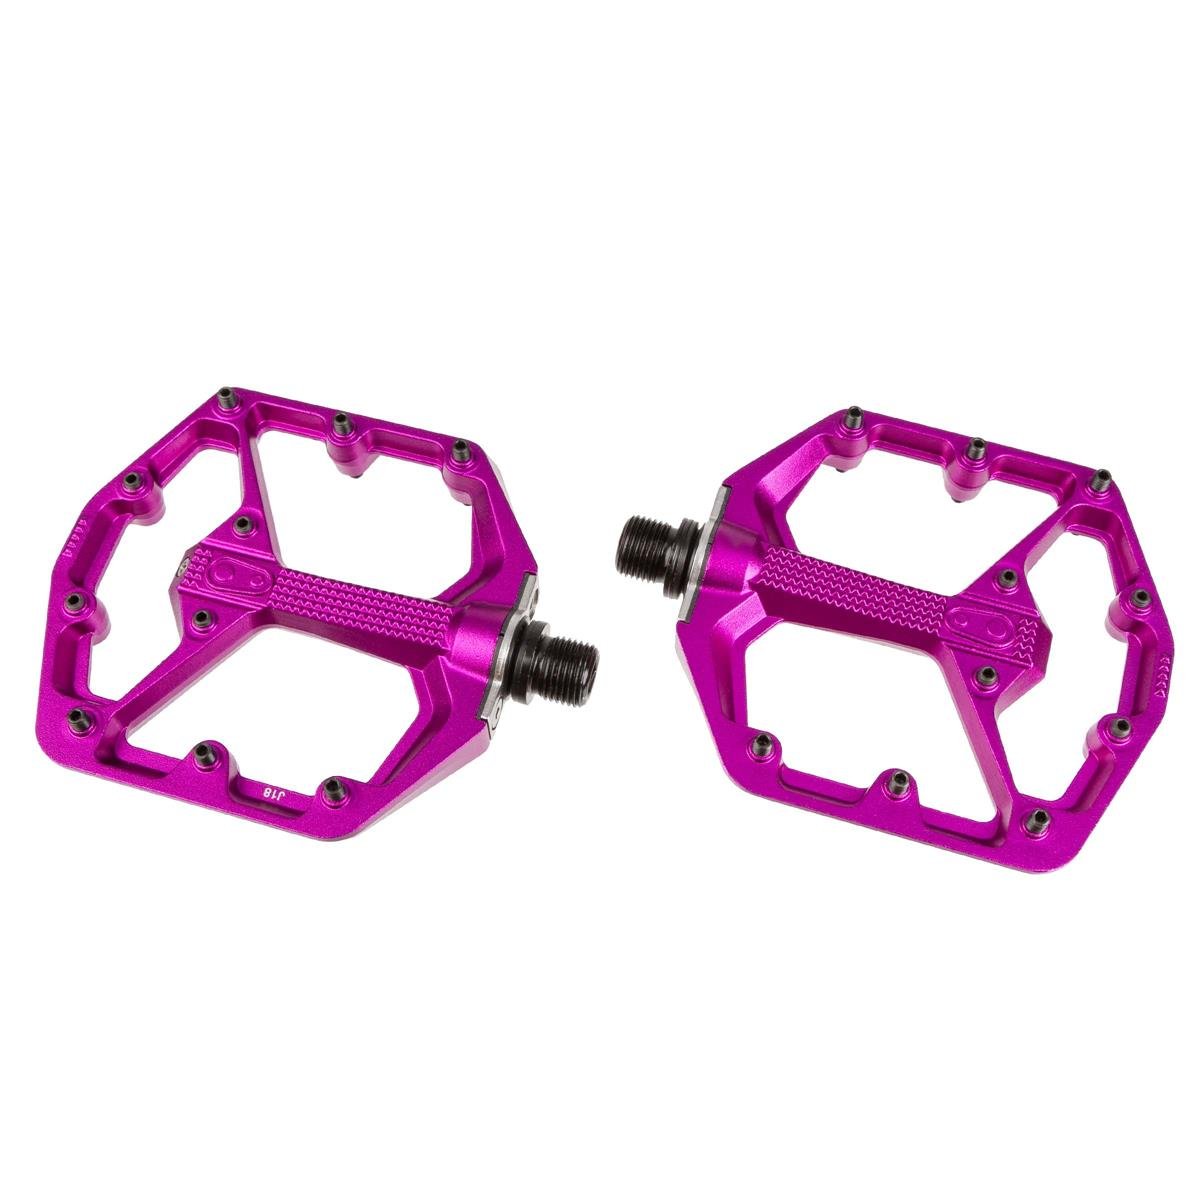 Crankbrothers Pedale Stamp 7 Limited Edition, Violett, Small